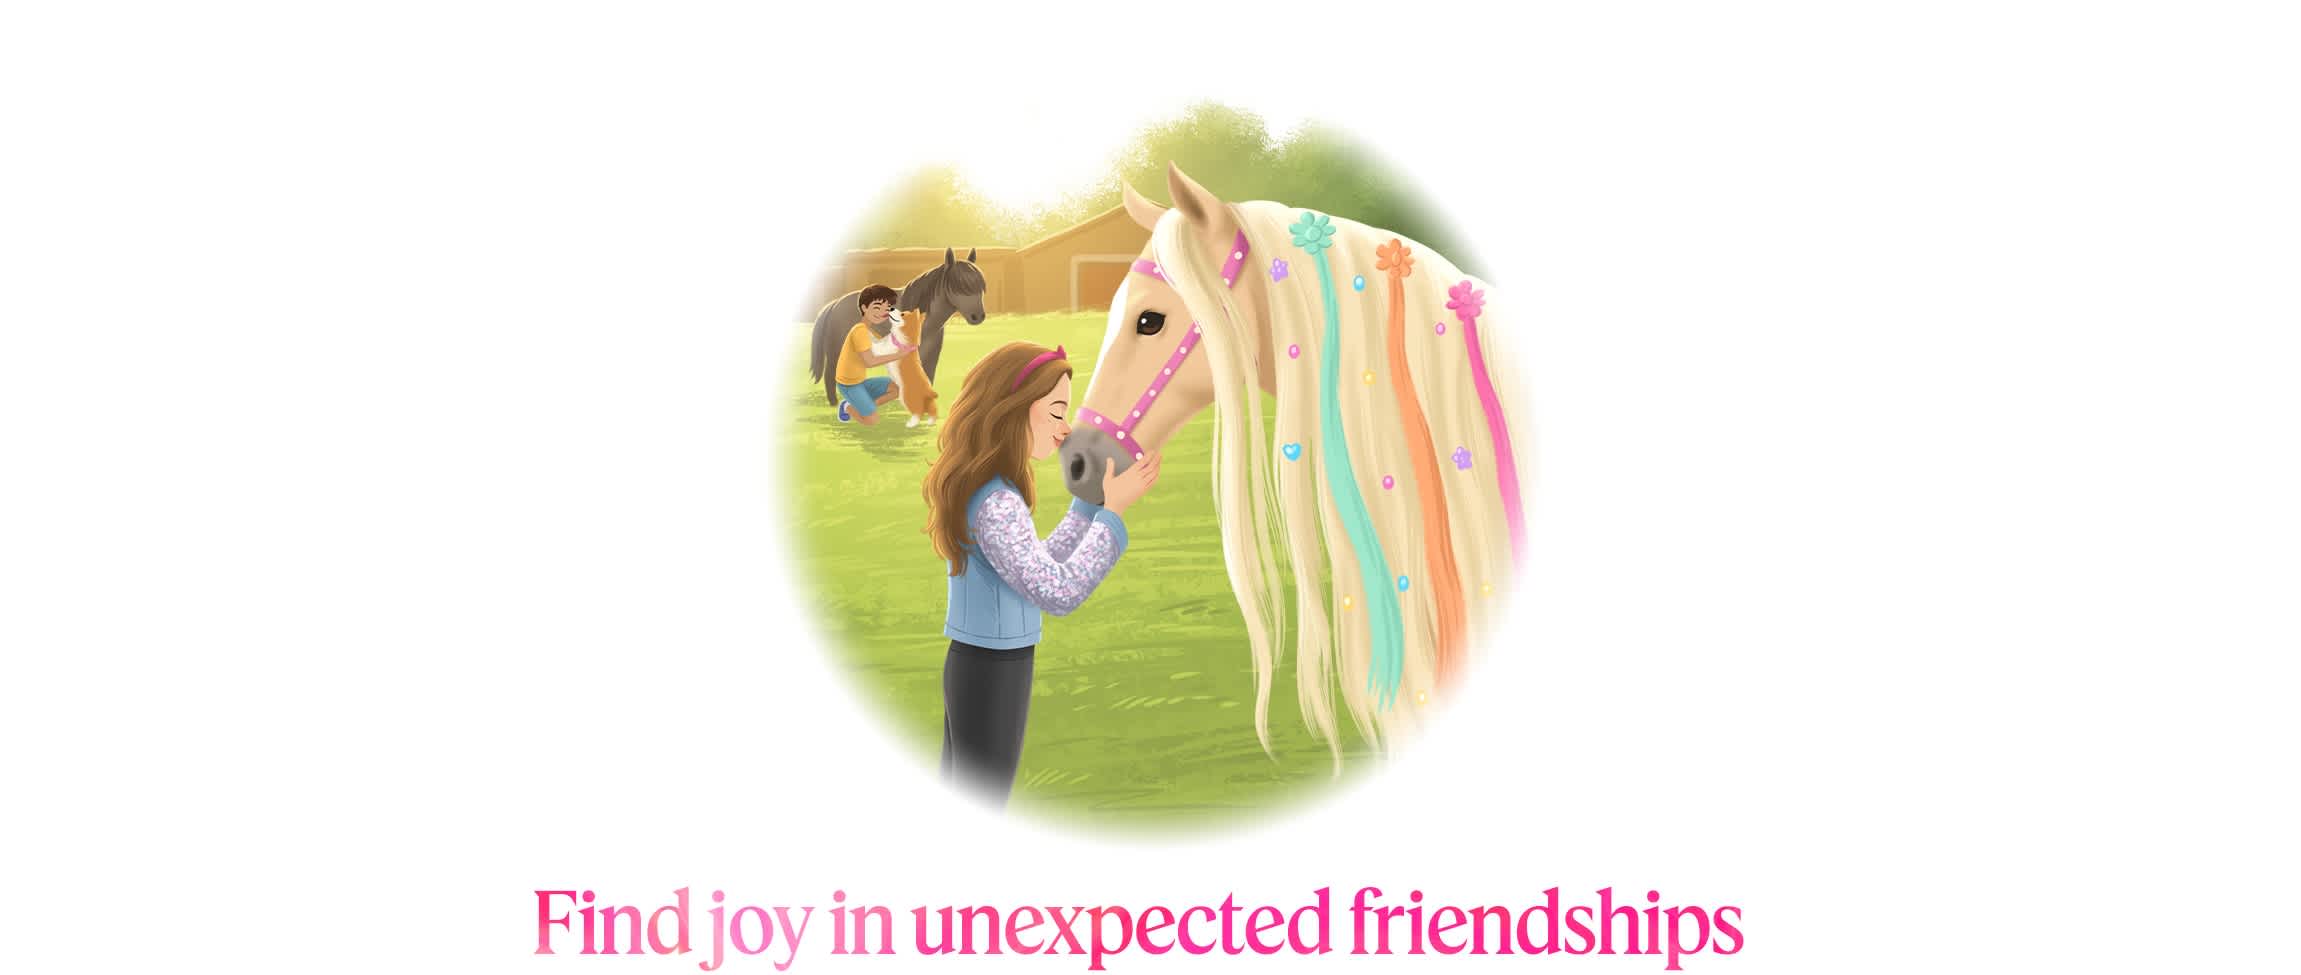 Find joy in unexpected friendships